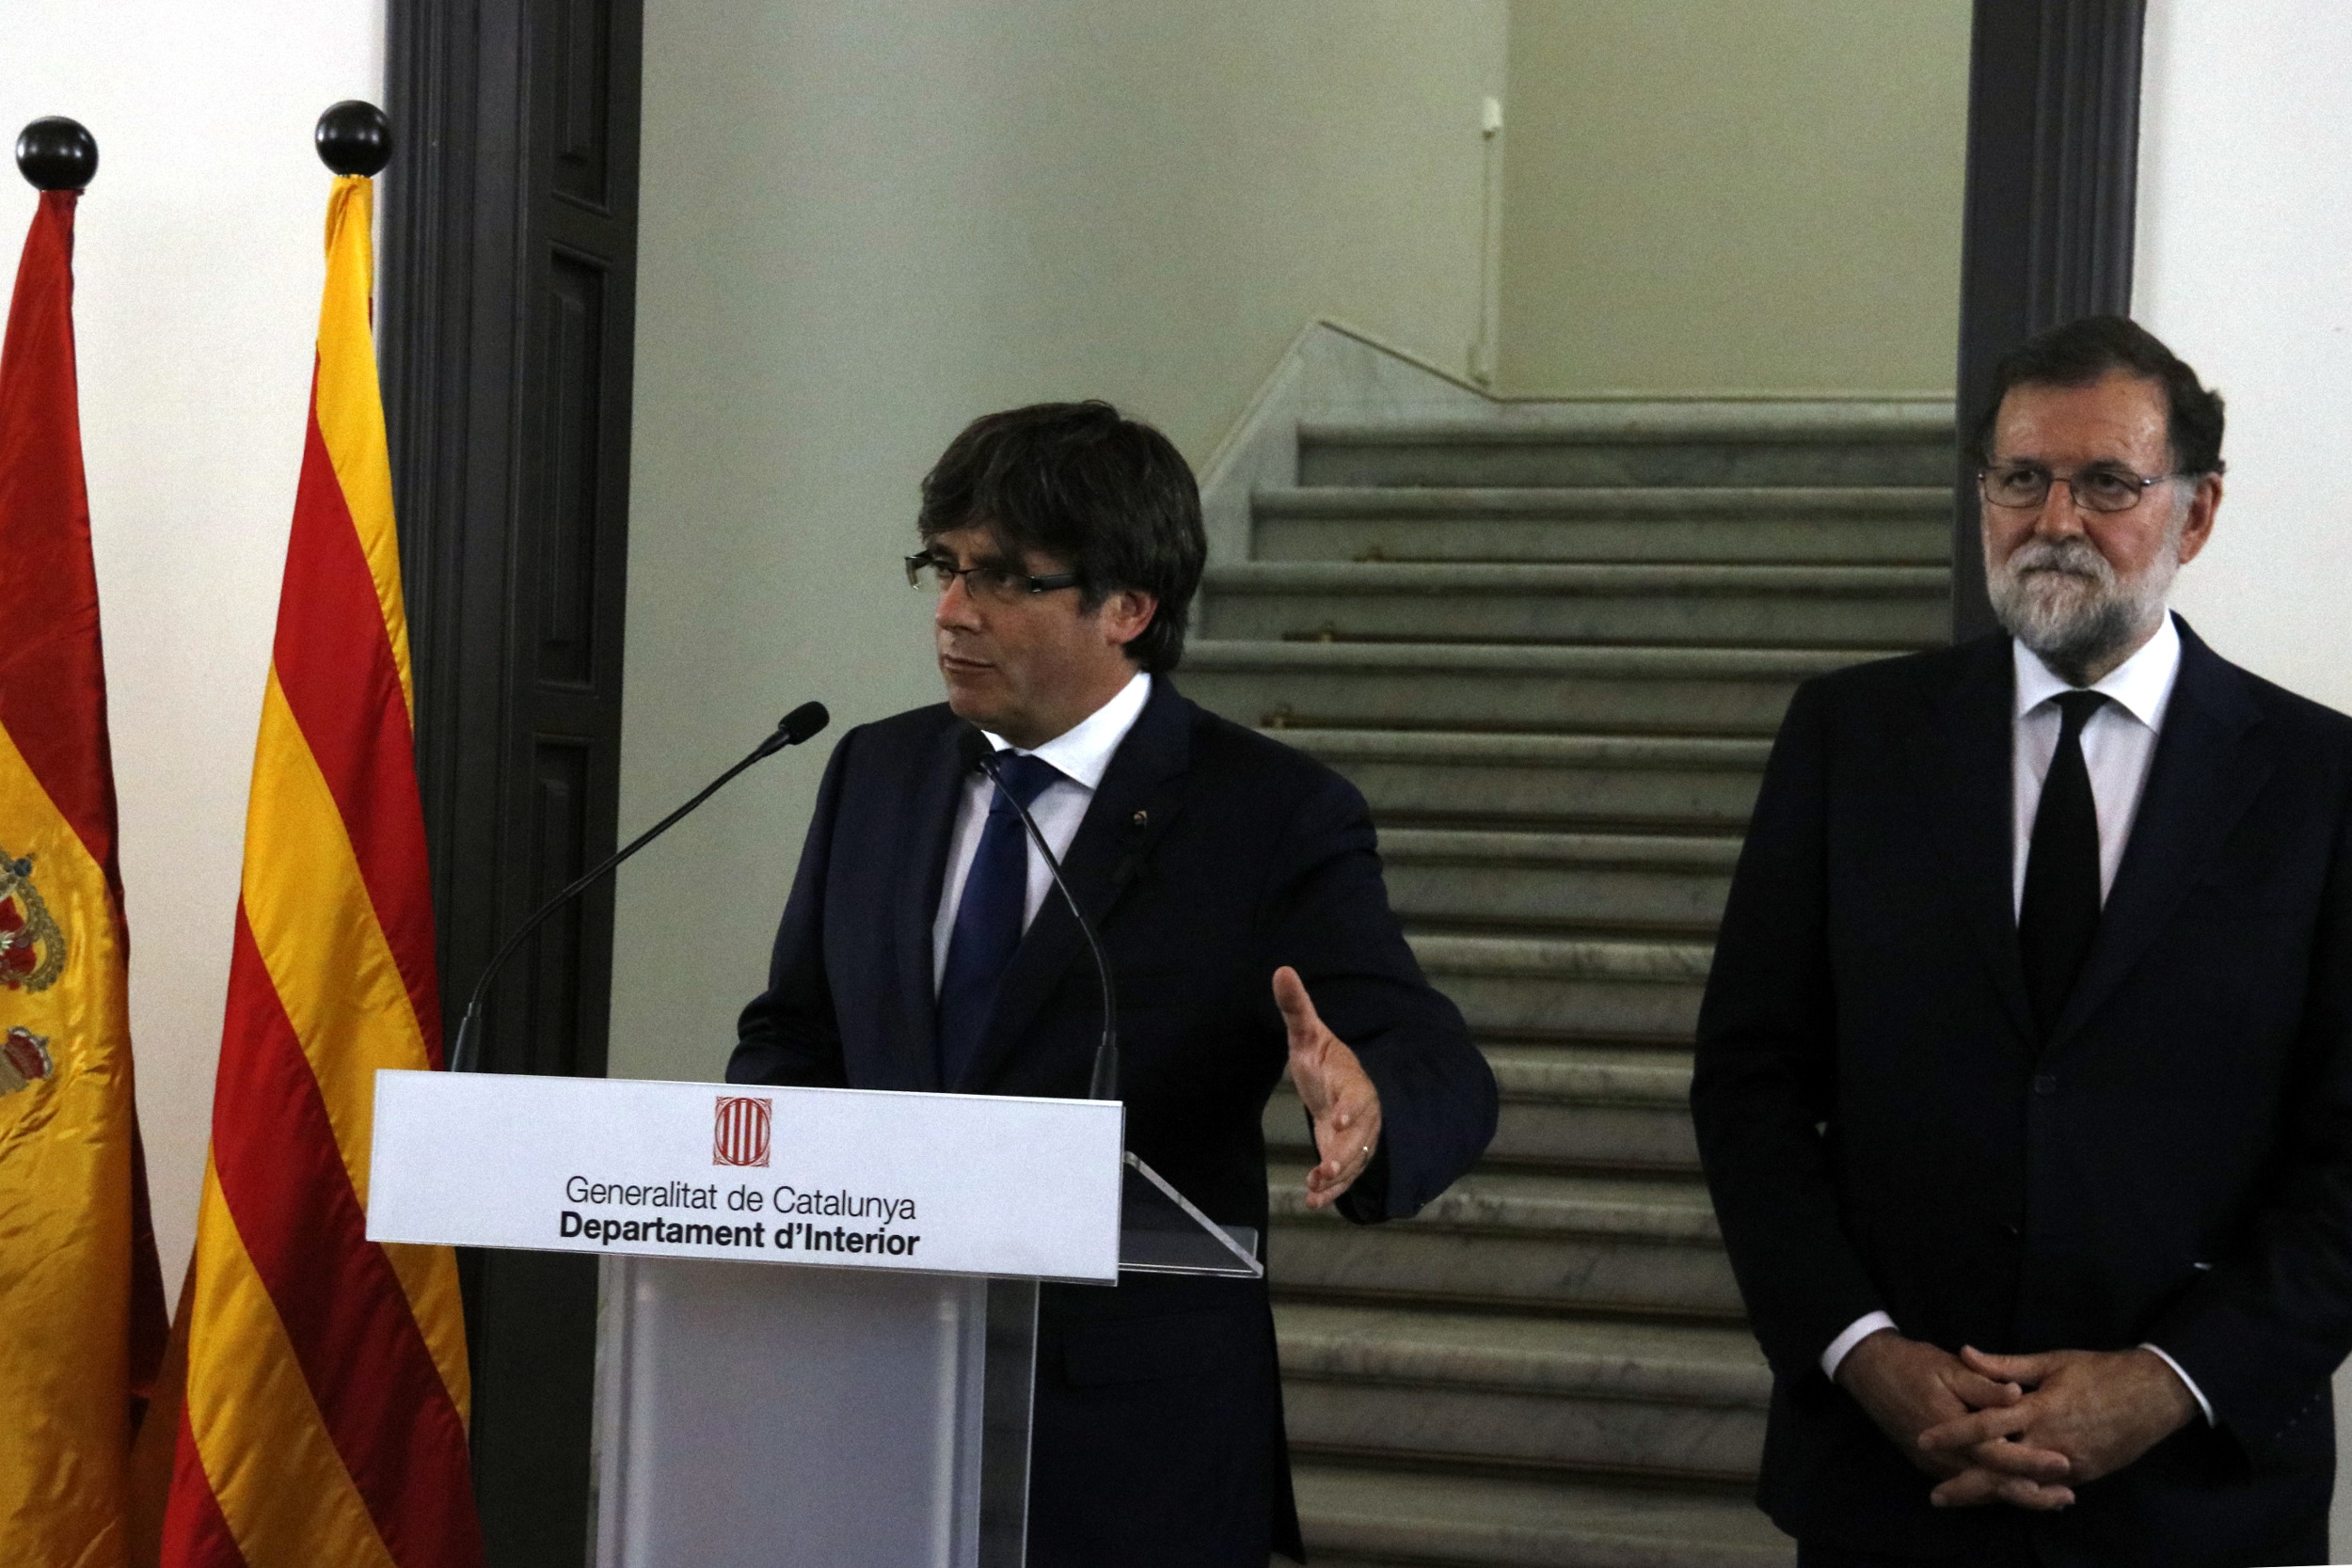 Catalan president, Carles Puigdemont, and his Spanish counterpart, Mariano Rajoy, in a joint appearance after the cabinet crisis (by Pol Solà)